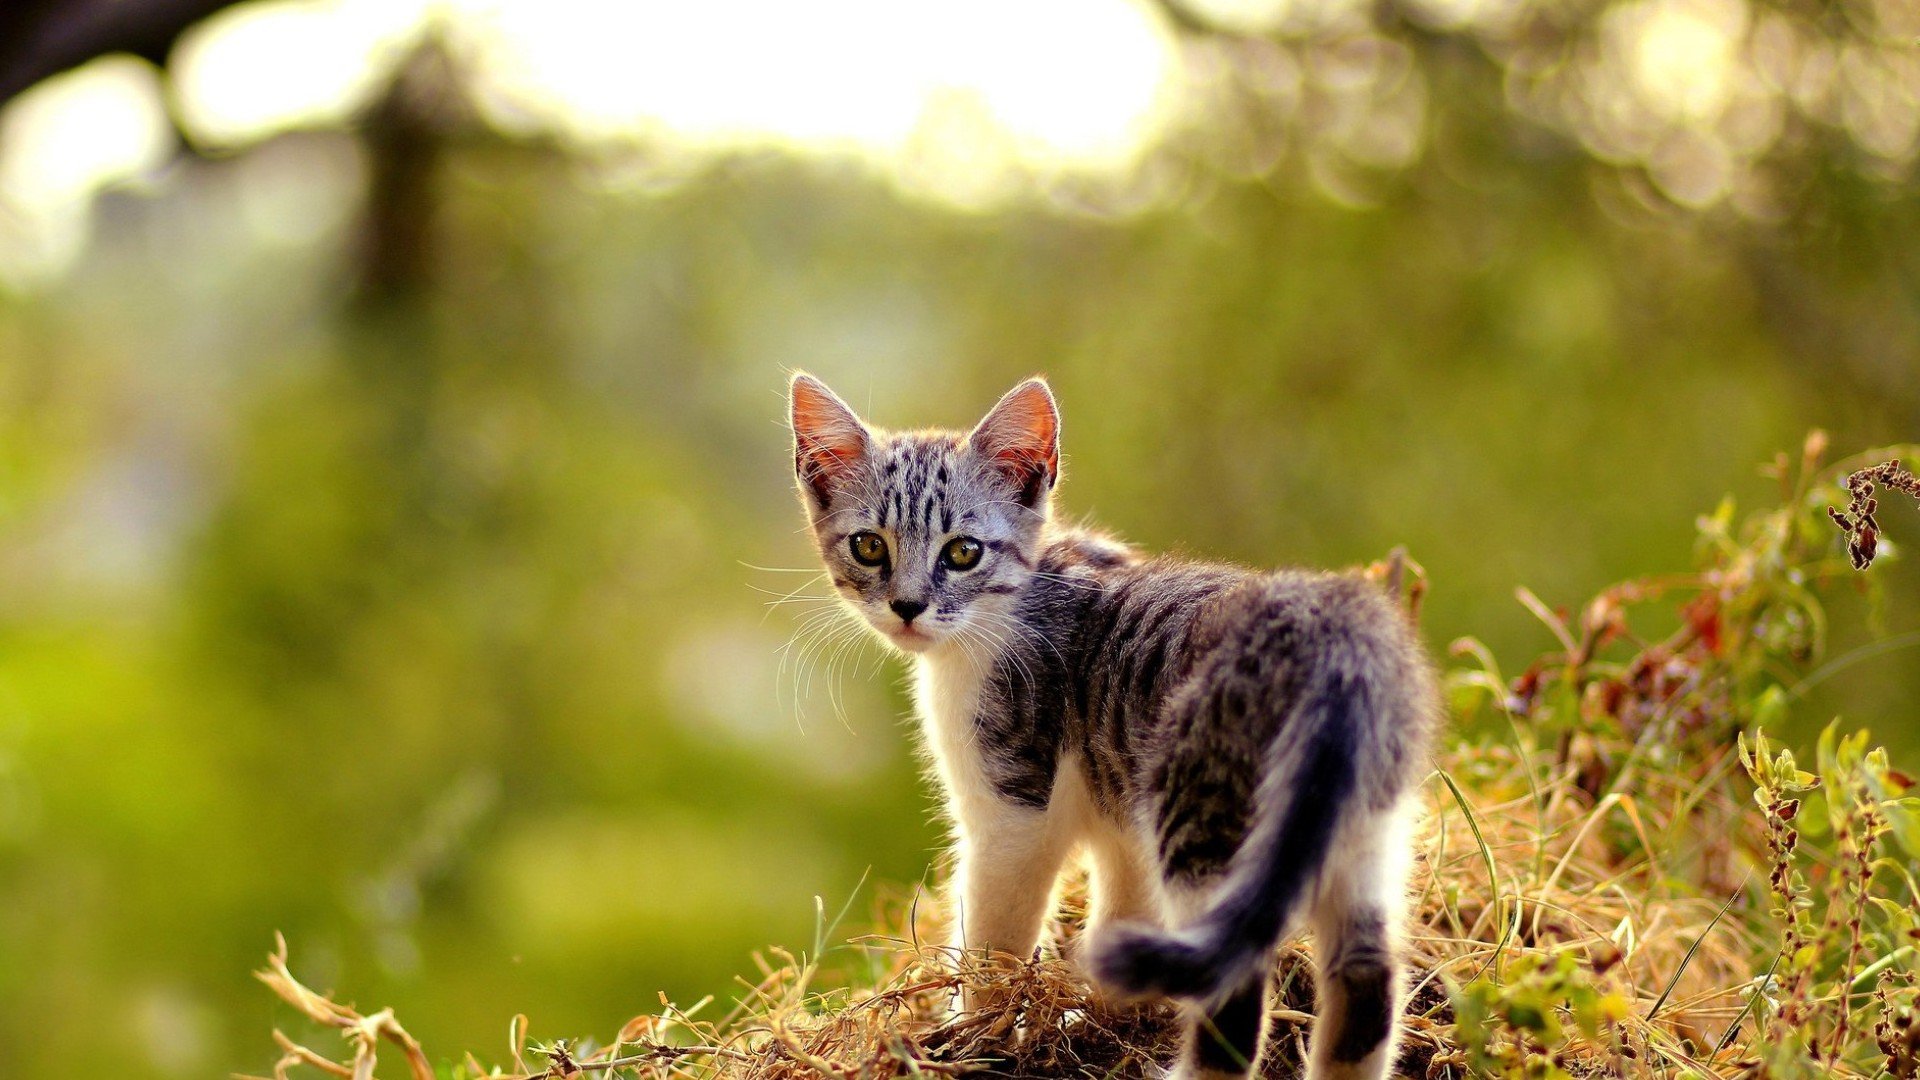 Download full hd Kitten PC background ID:426385 for free